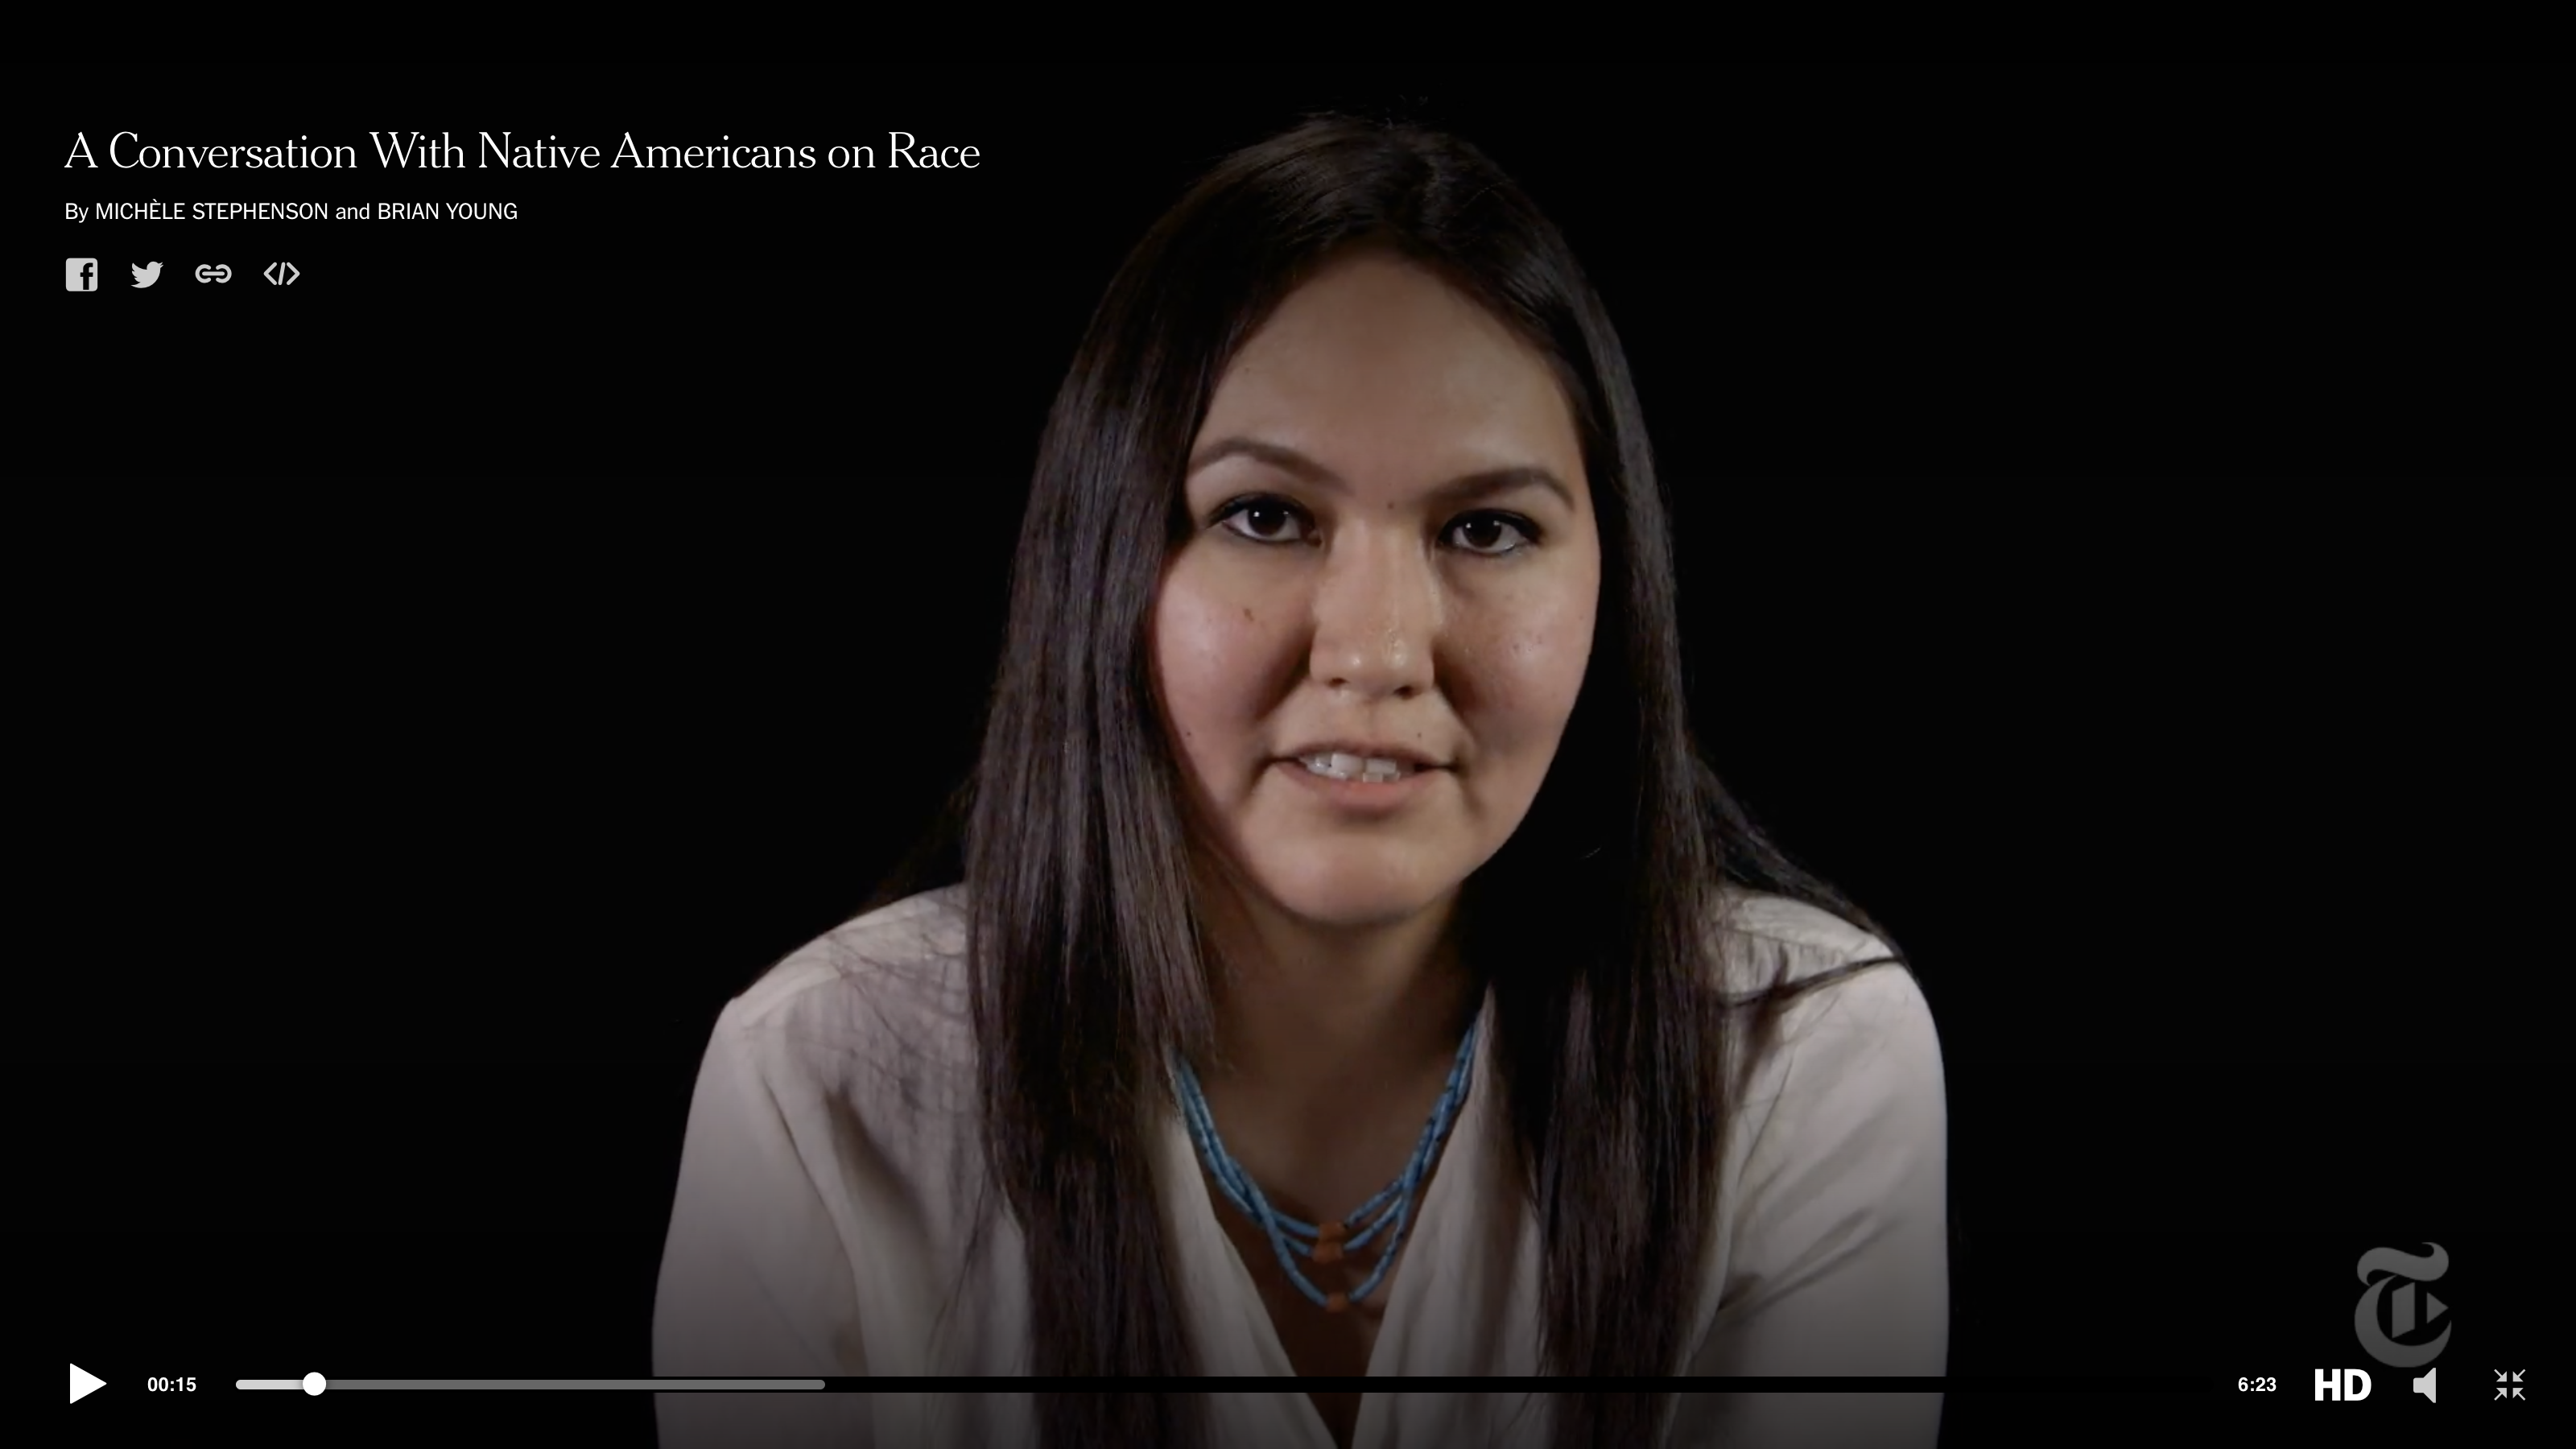 New York Times turns to Native Americans for Conversation on Race project